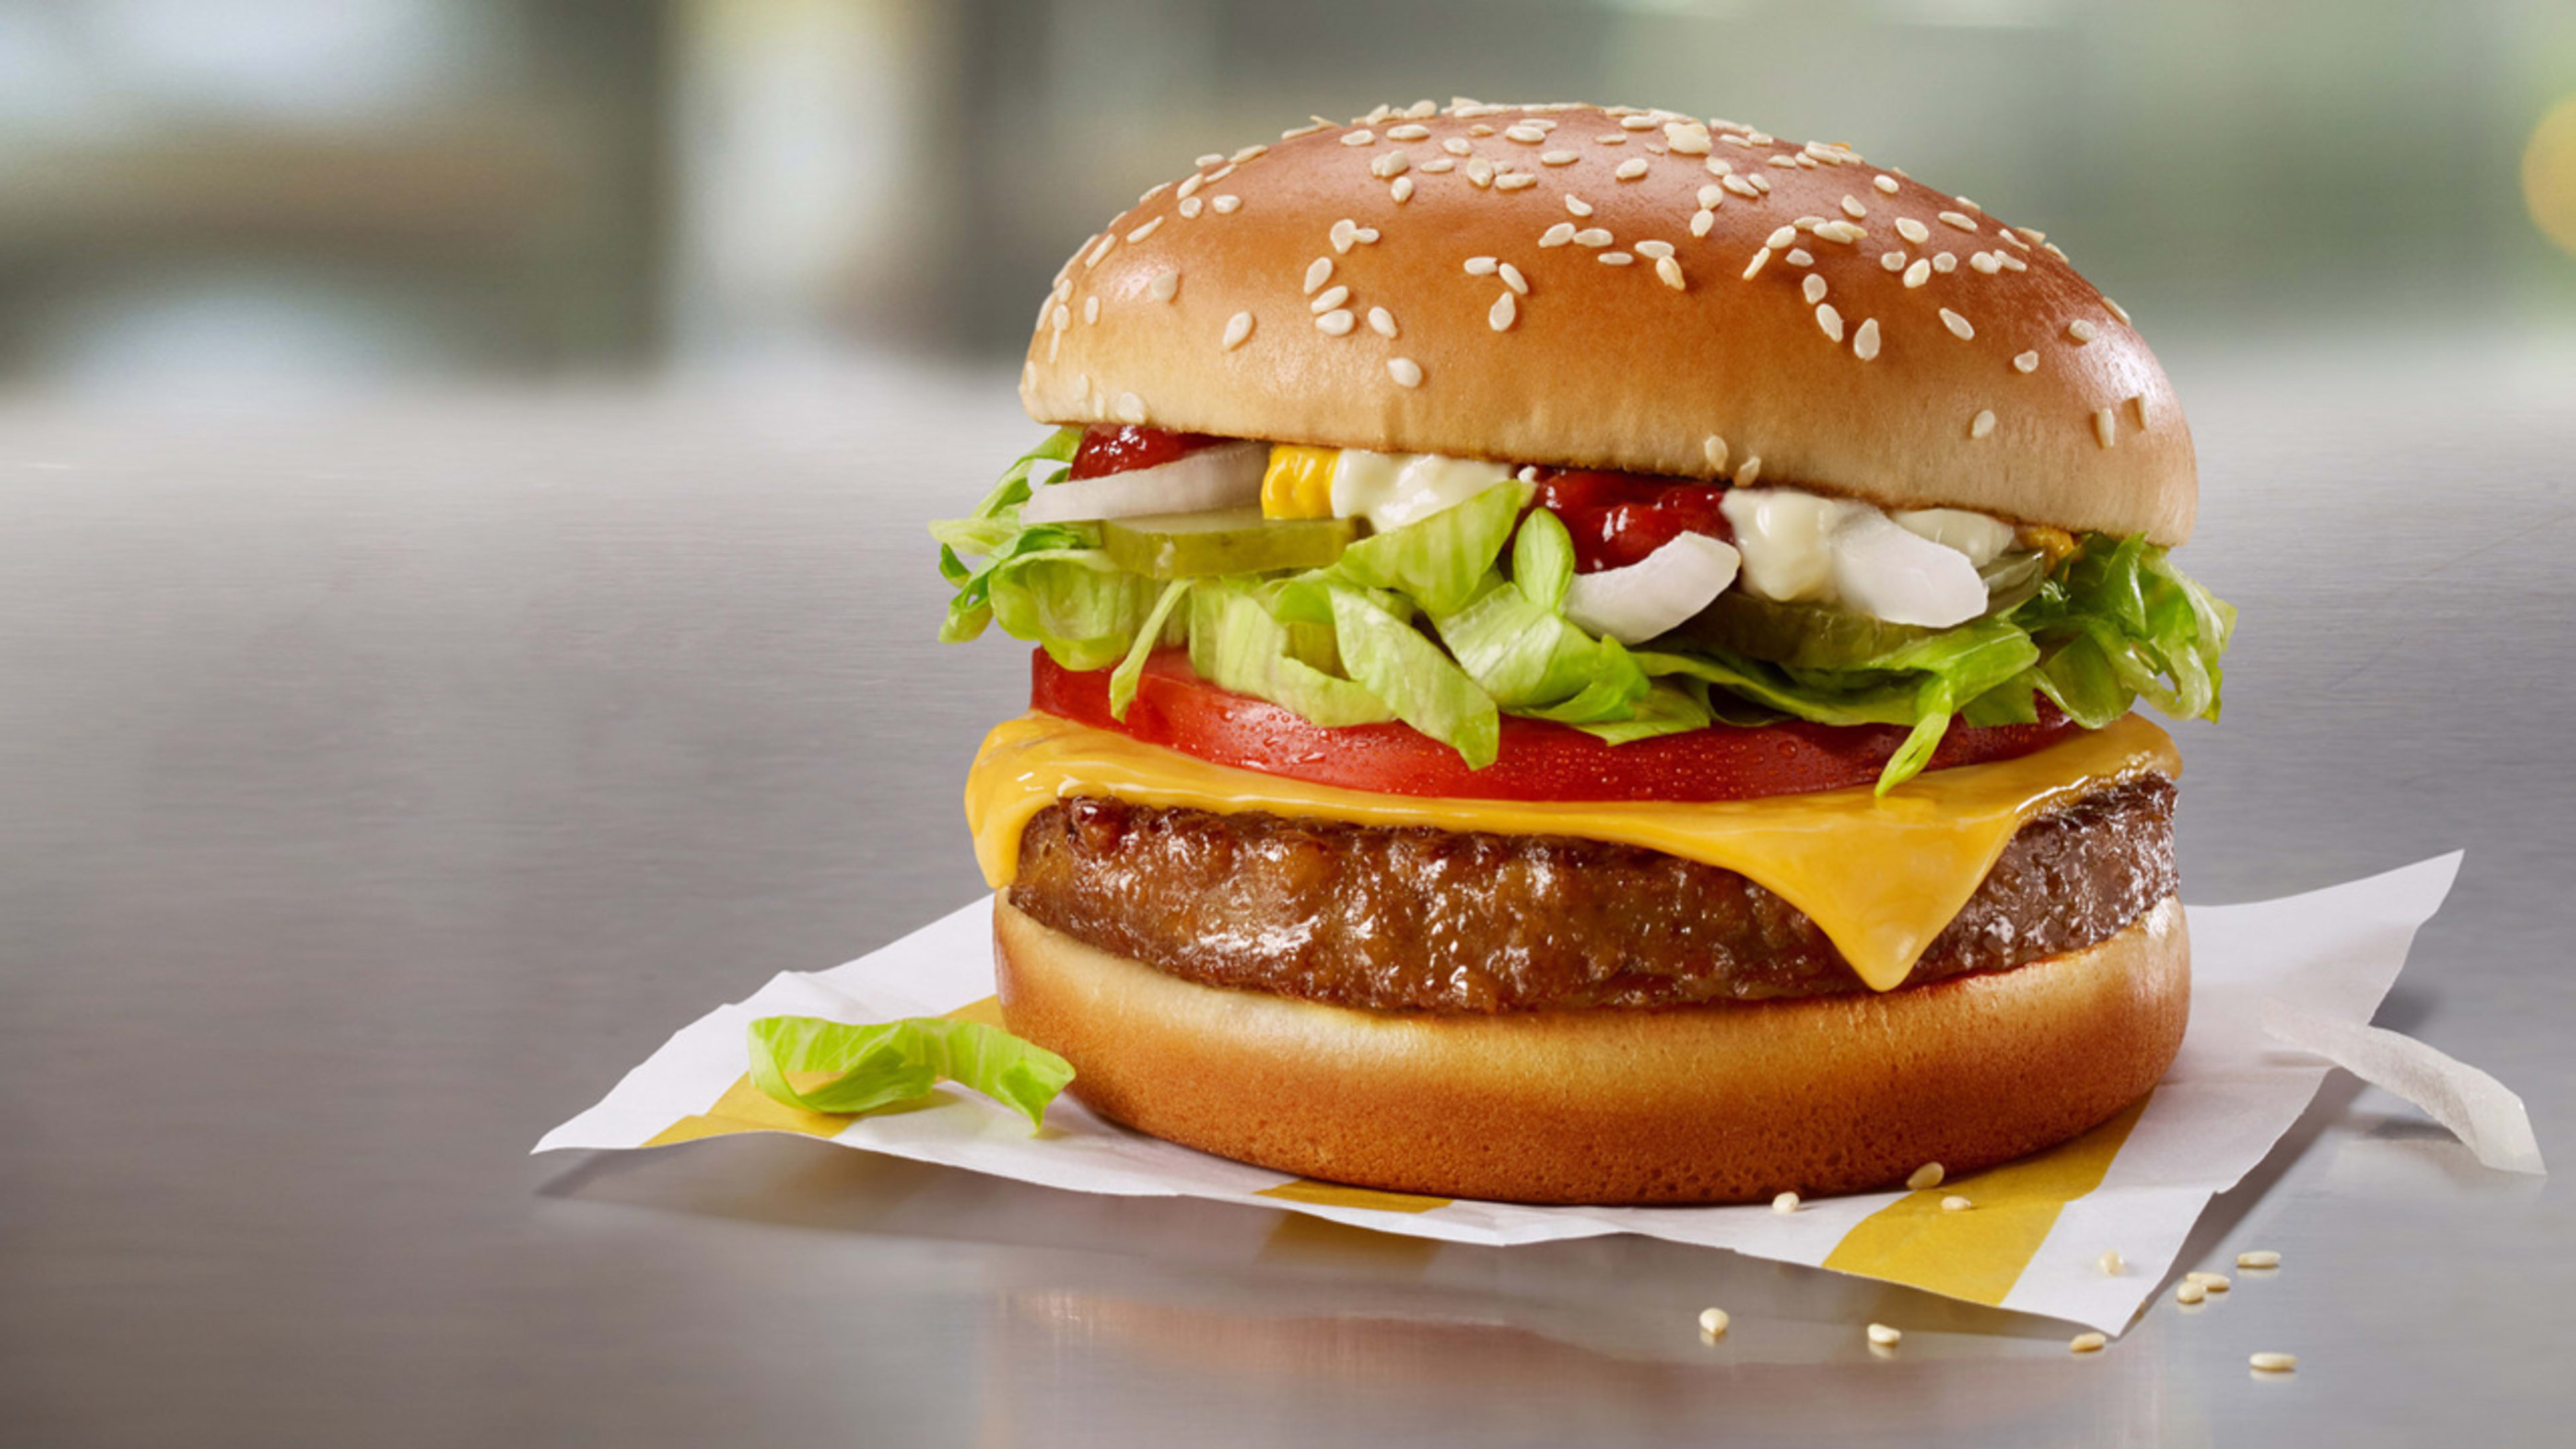 McDonald’s is finally, finally, finally testing a Beyond Meat plant-based burger